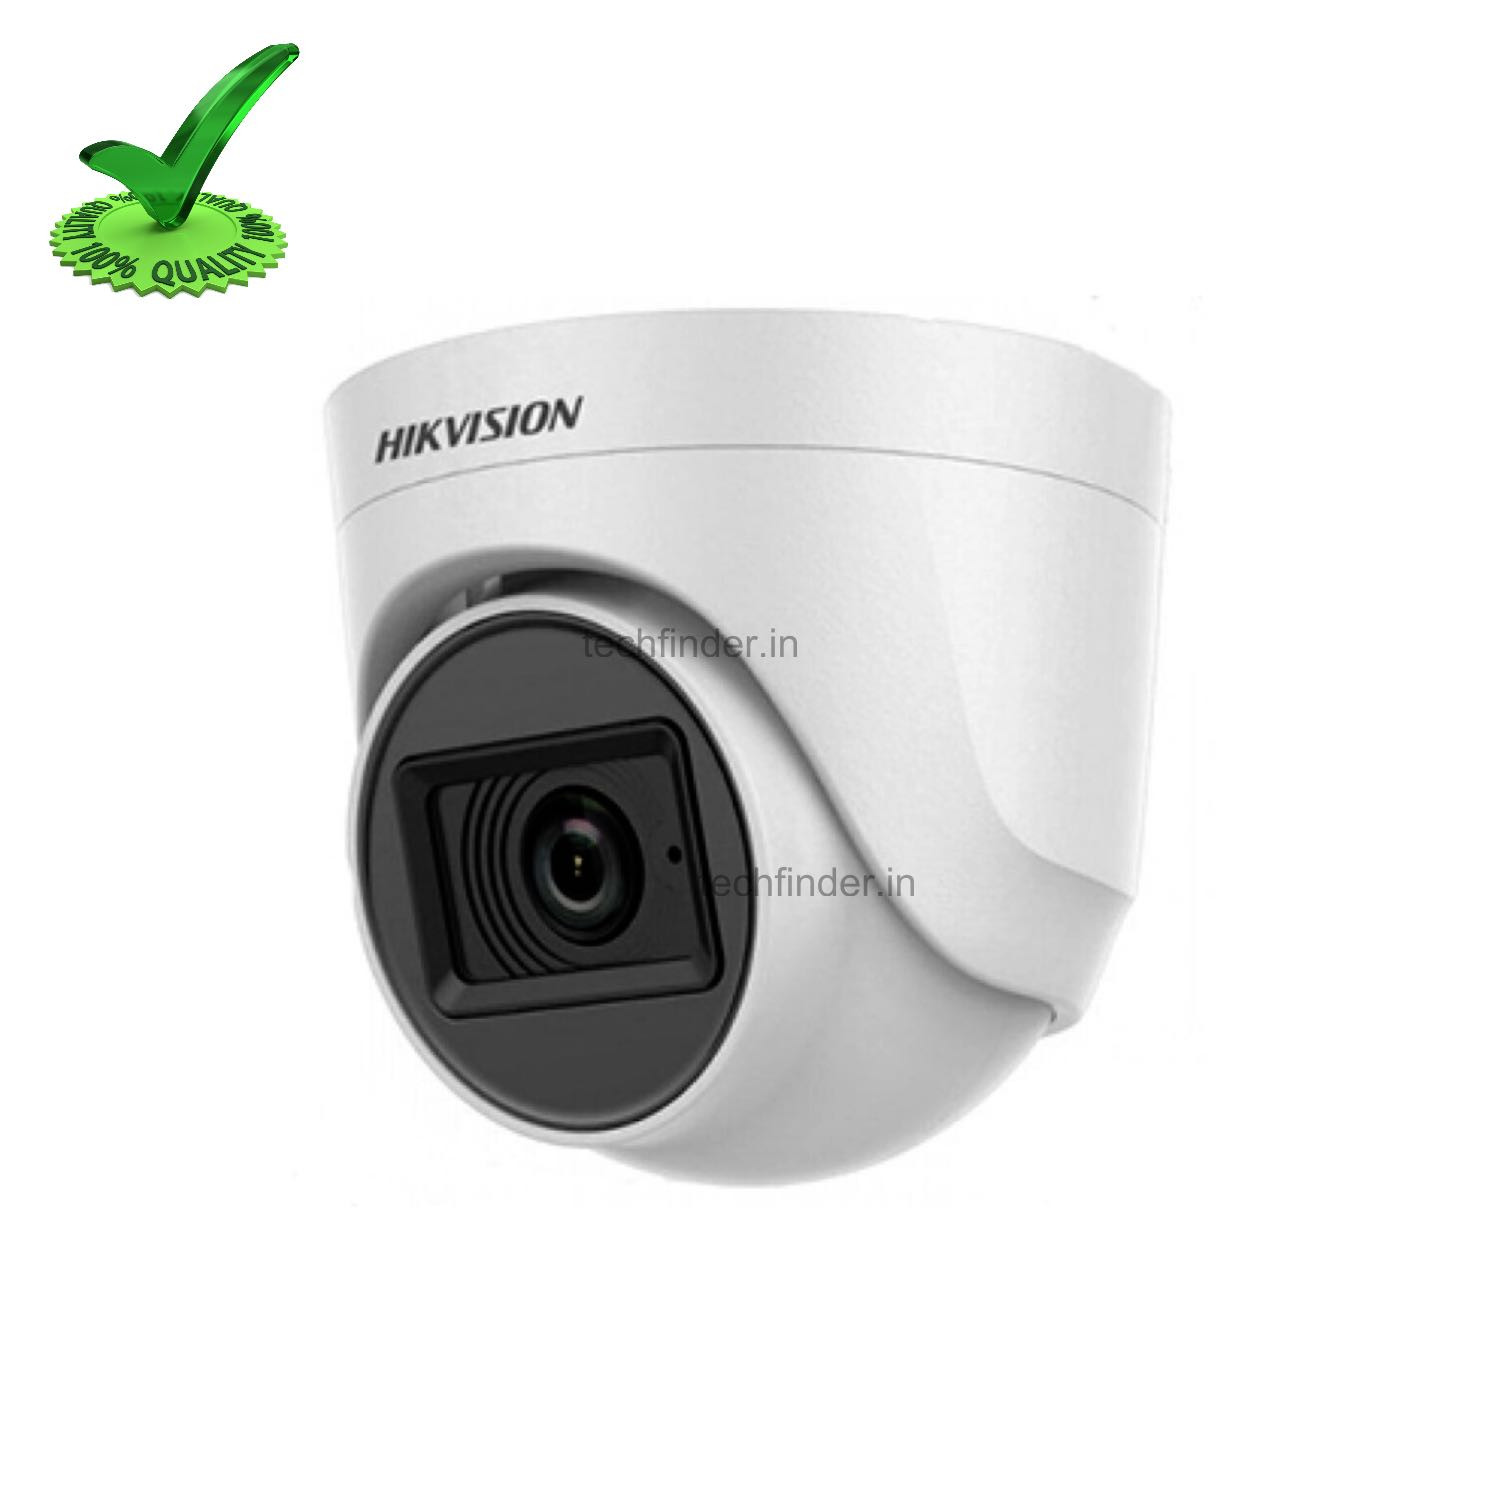 Hikvision DS-2CE76H0T-ITPFS 5MP HD Dome Camera